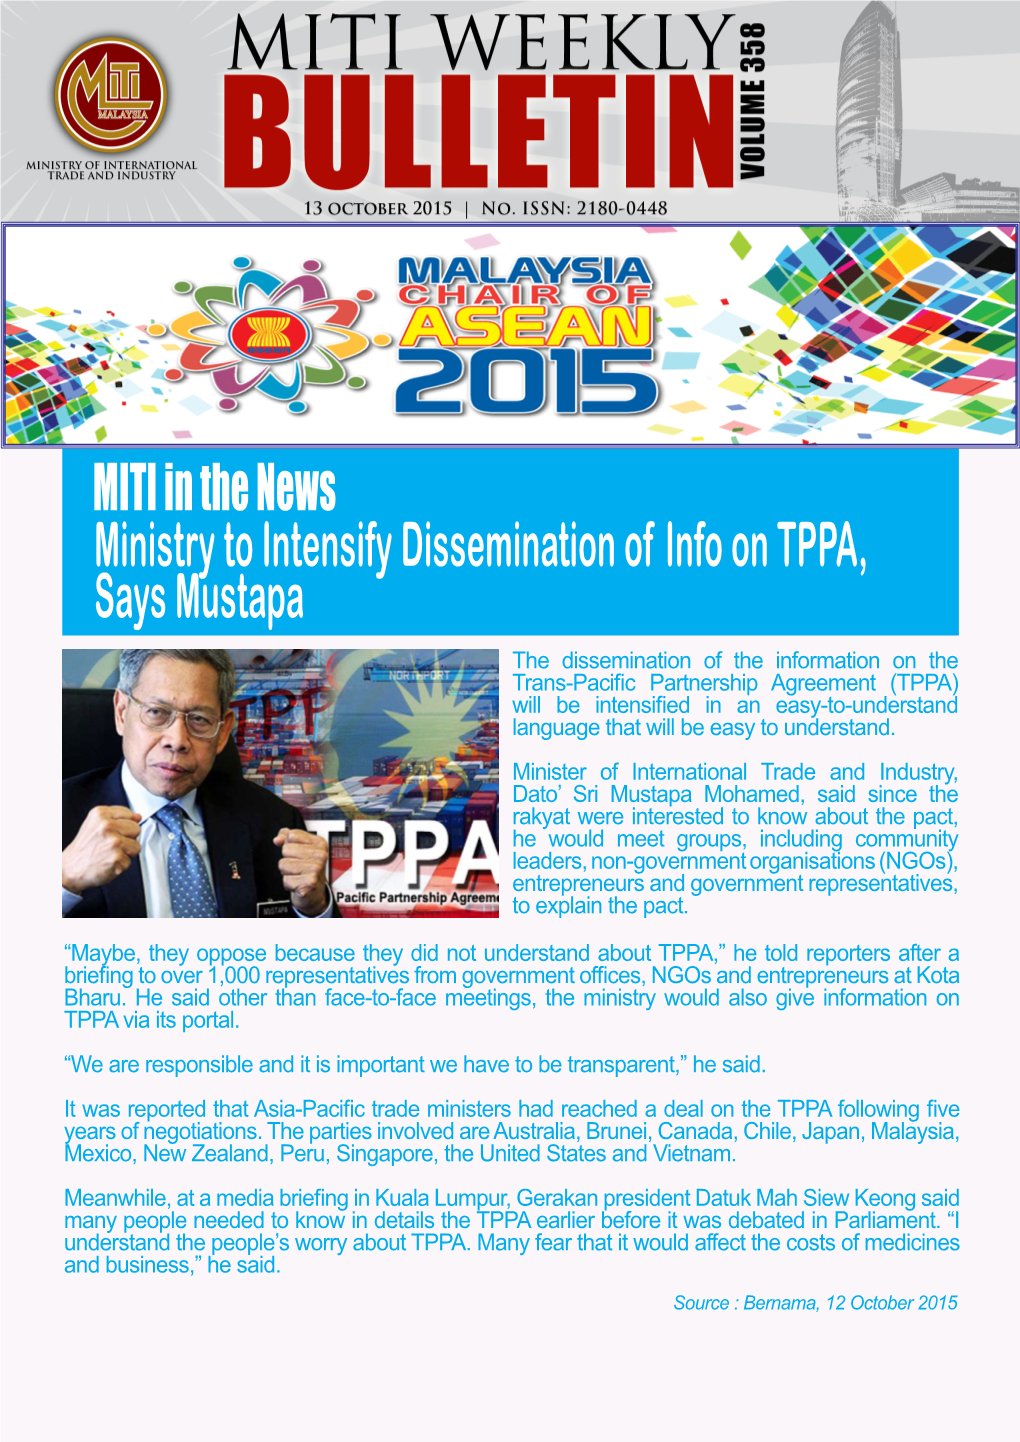 Ministry to Intensify Dissemination of Info on TPPA, Says Mustapa